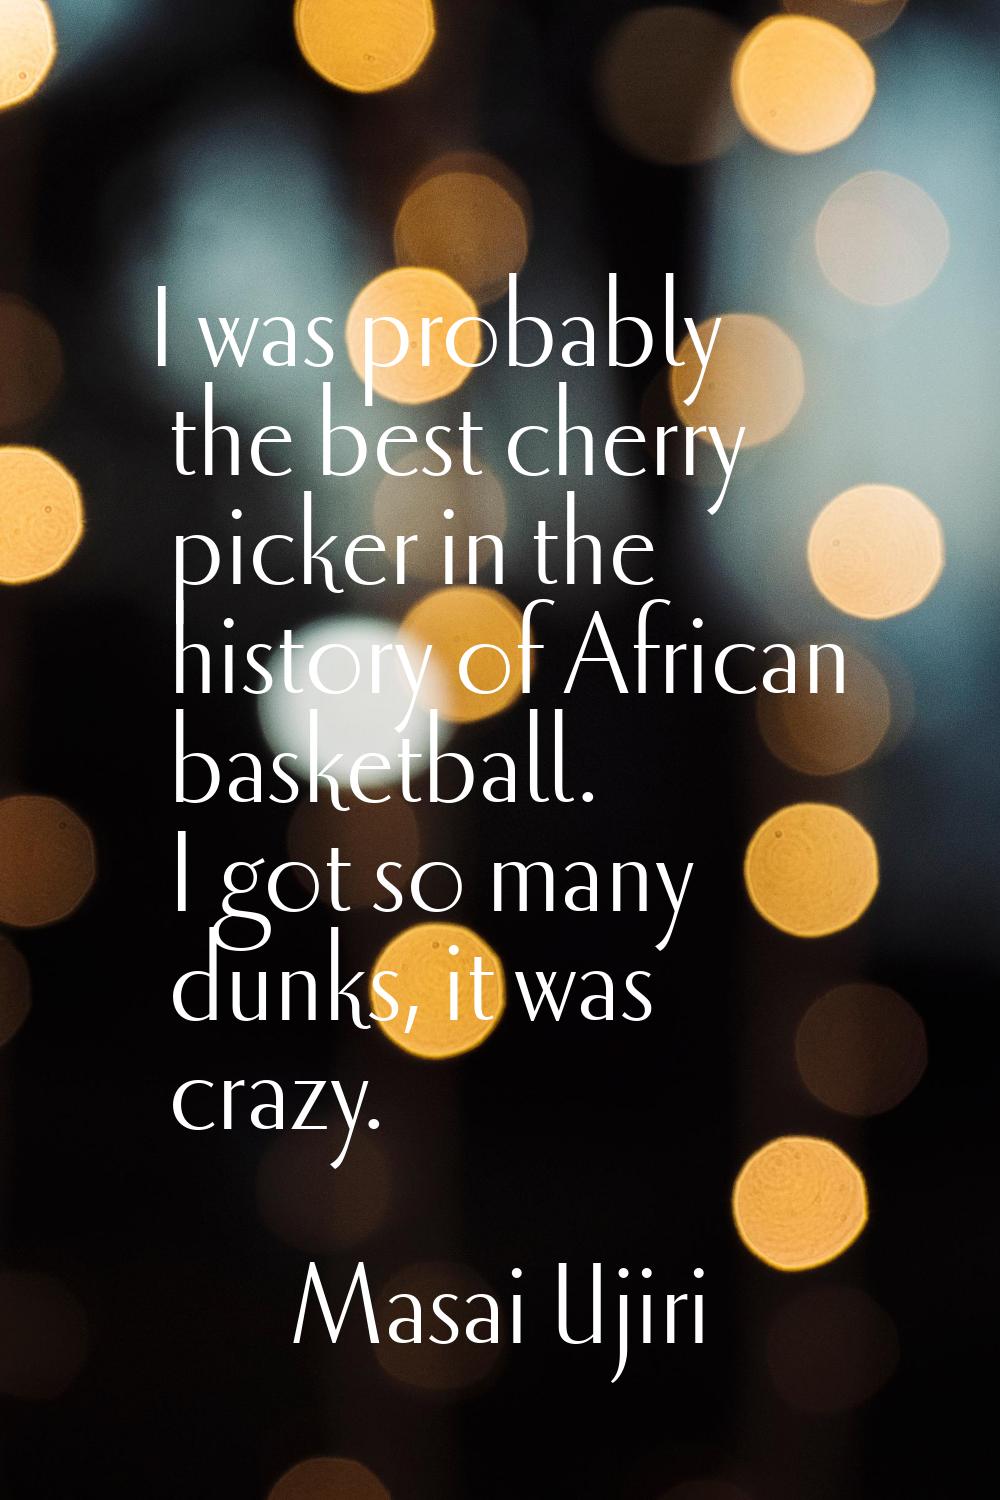 I was probably the best cherry picker in the history of African basketball. I got so many dunks, it